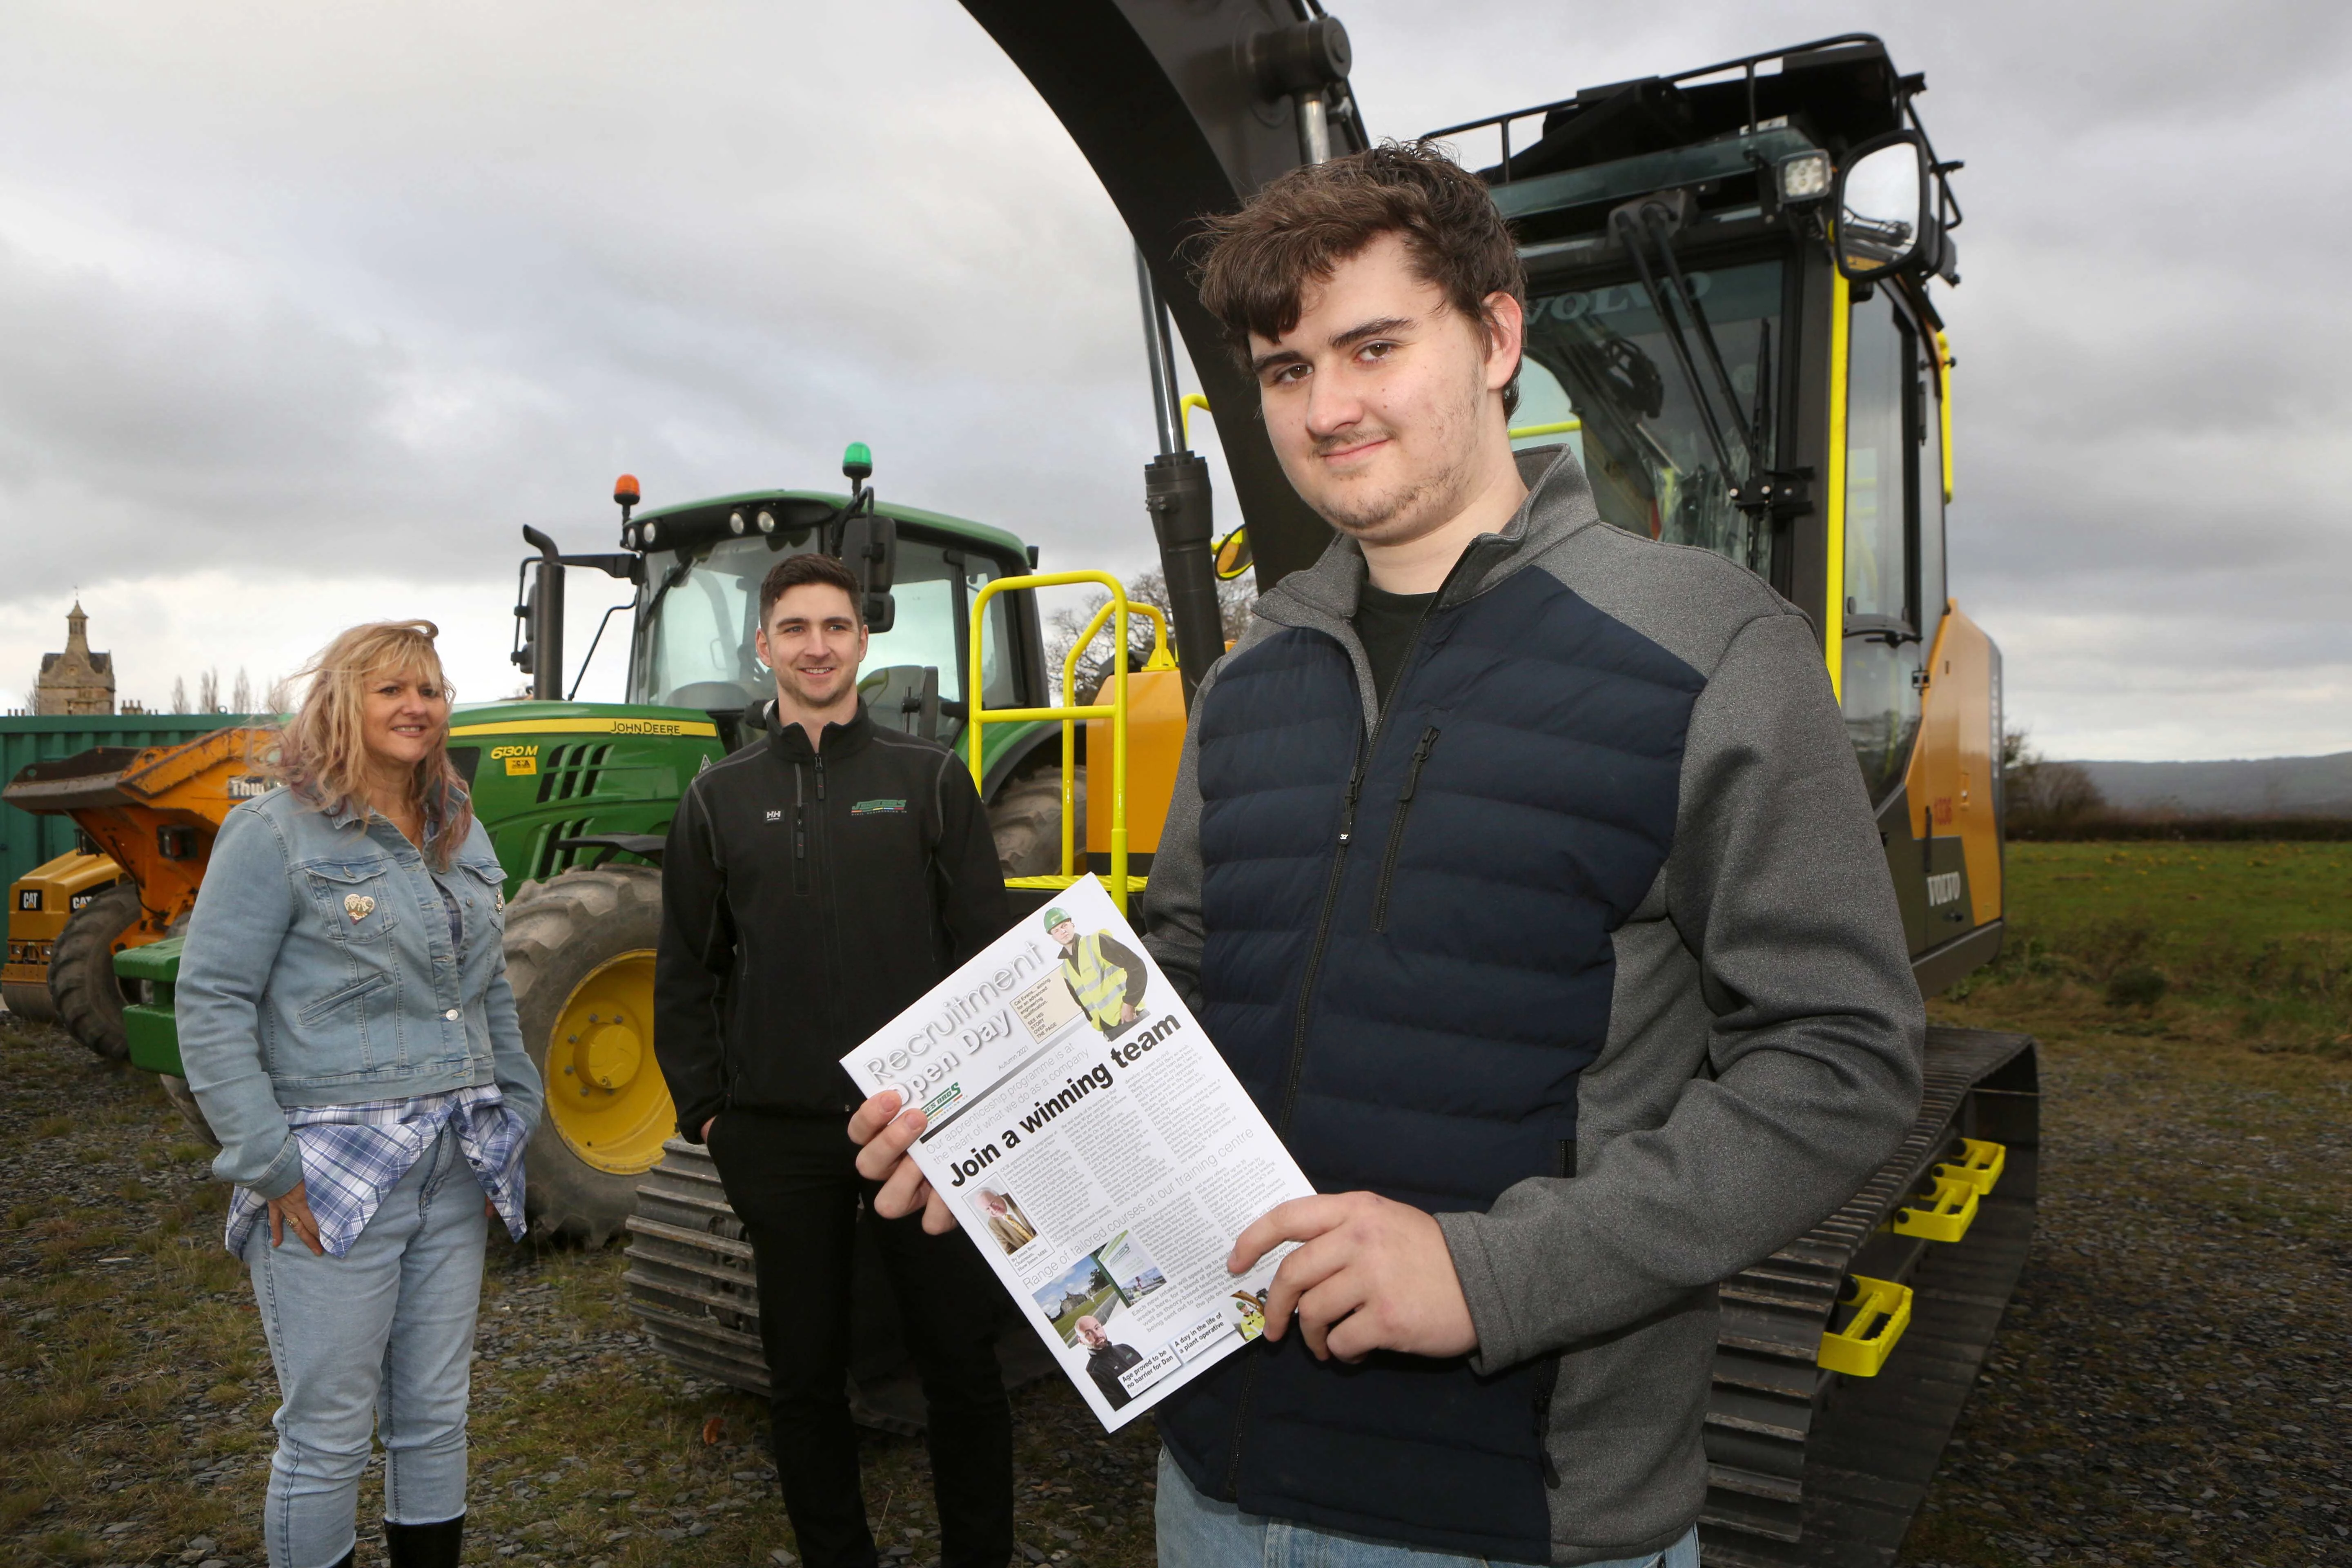 Mother and son Louise and Tristen Duff discuss apprenticeships with Jones Bros Training Manager Garmon Hafal (centre) during the JB Recruitment Open Day at their Denbigh Training Centre 